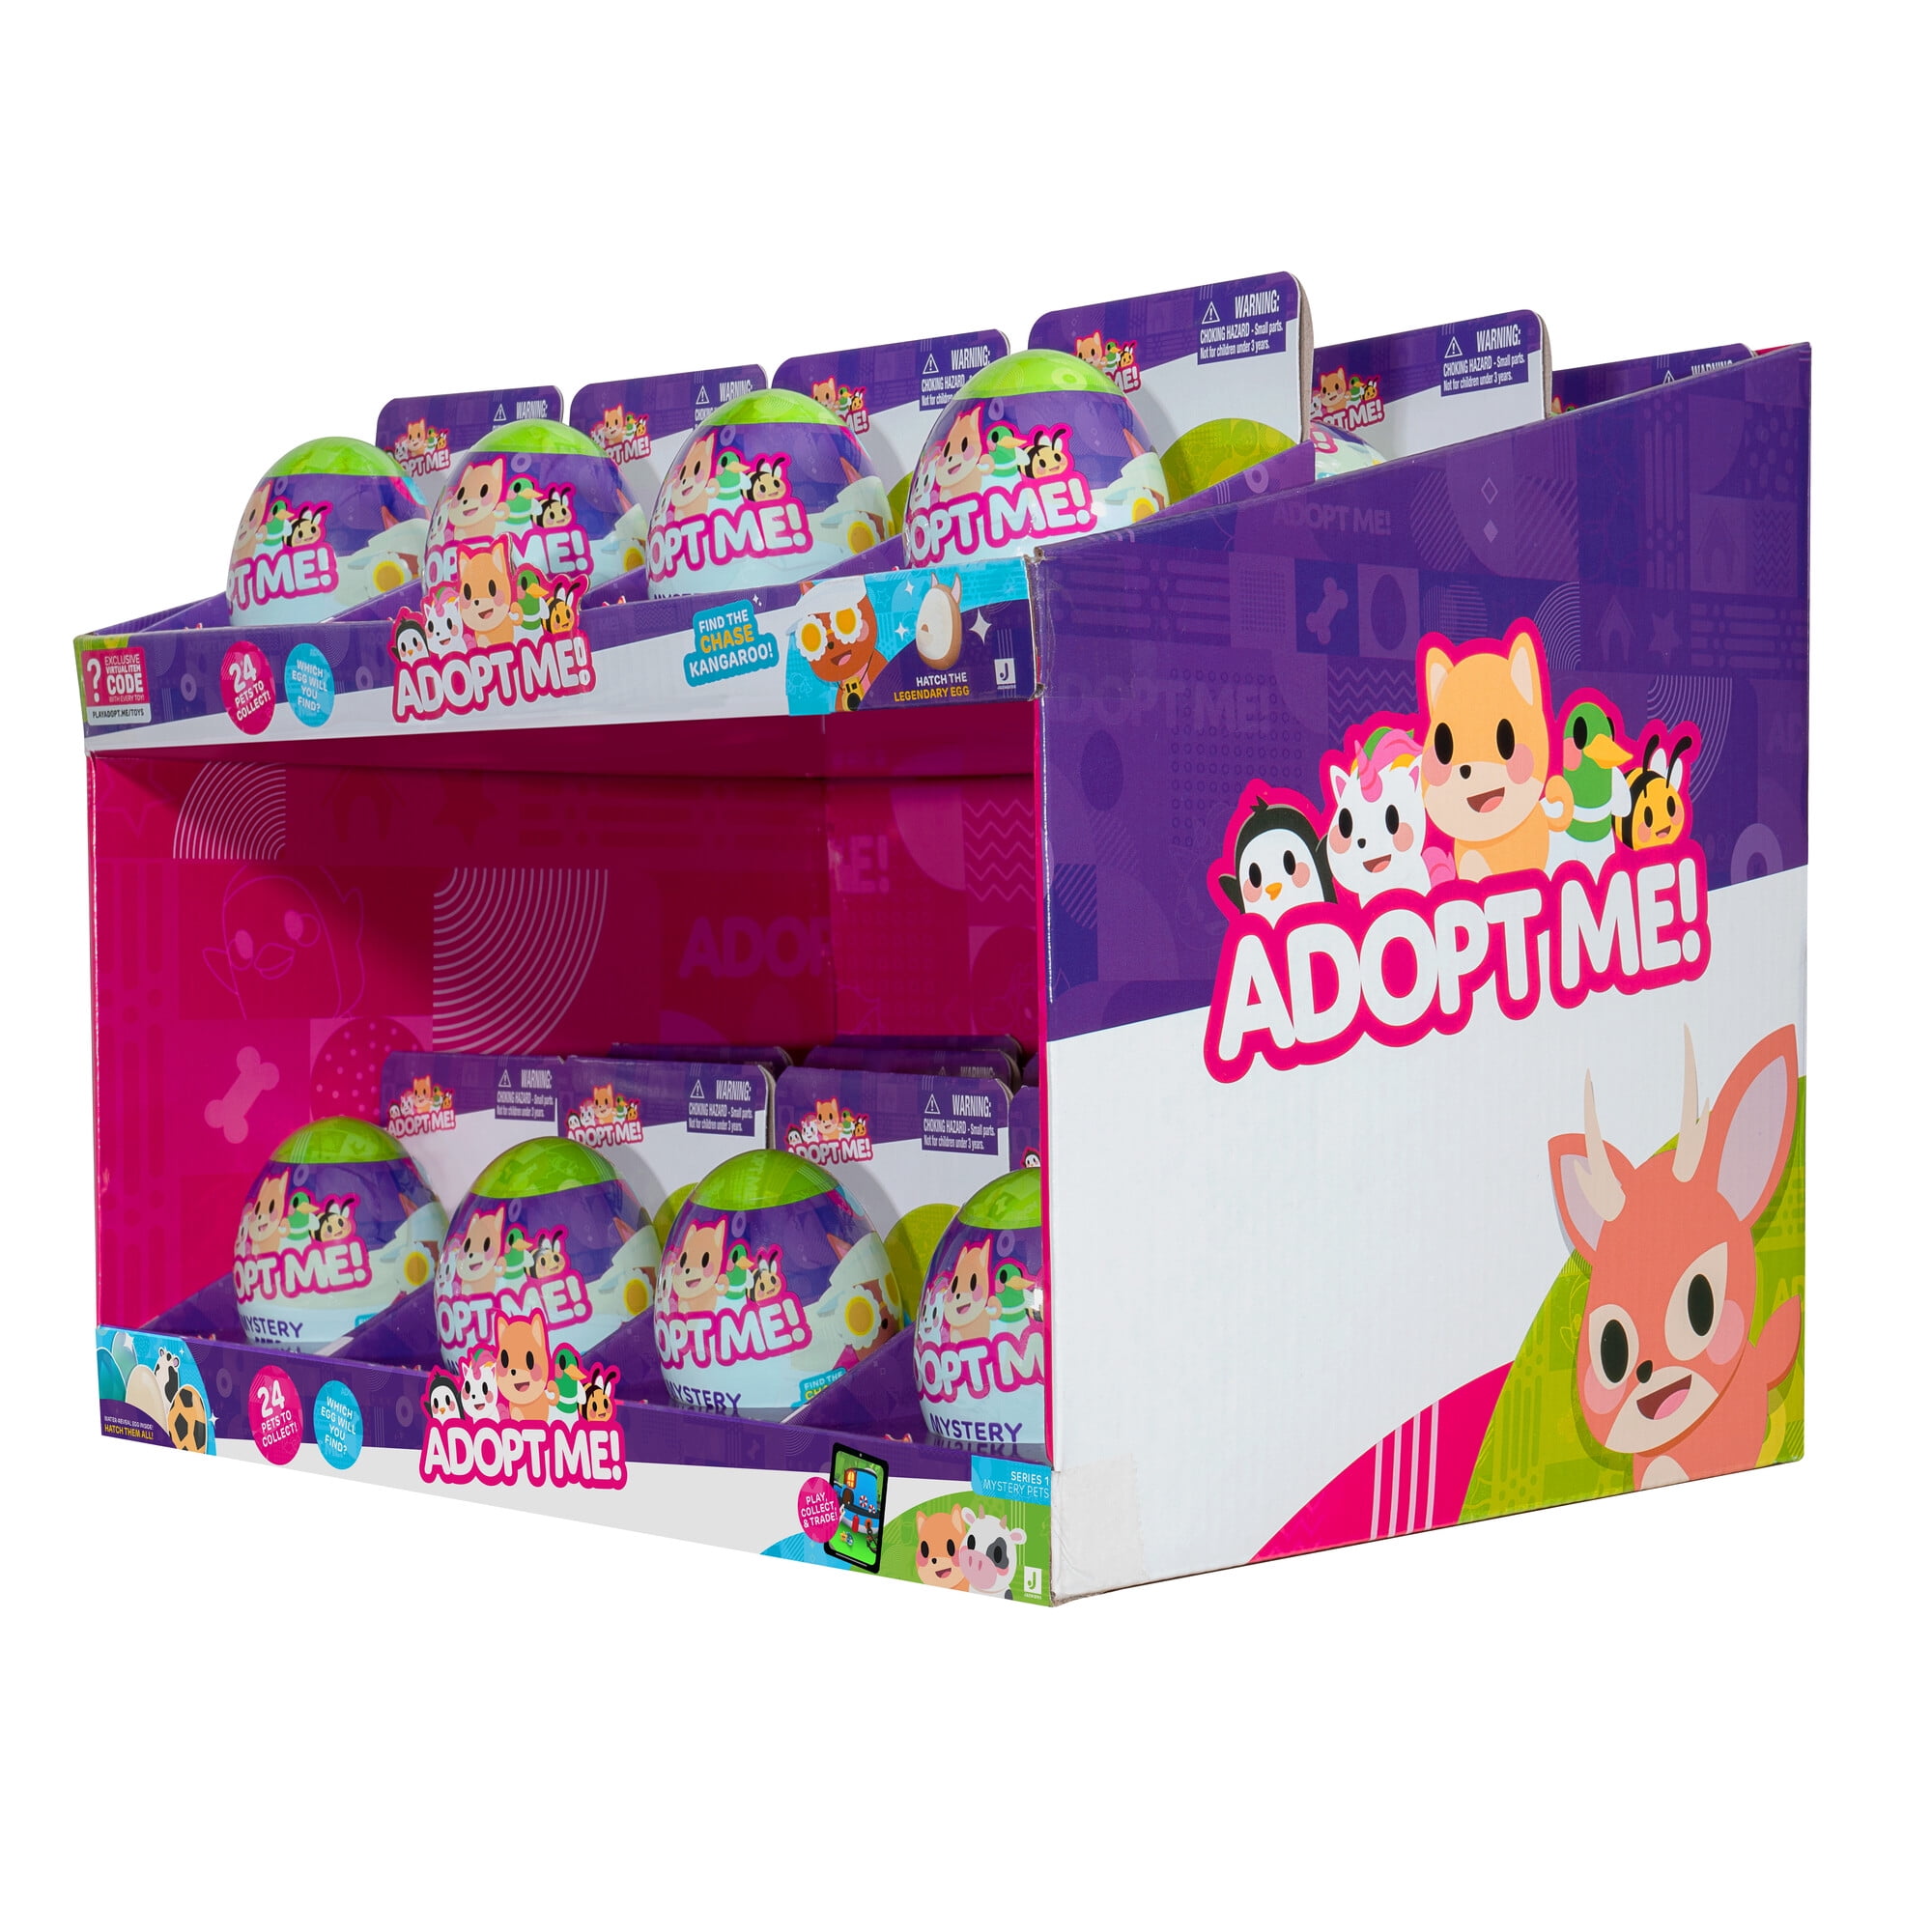  Adopt Me! 10 Pack Mystery Pets - Series 1-10 Pets - Top Online  Game - Exclusive Virtual Item Code Included - Fun Collectible Toys for Kids  Featuring Your Favorite Pets, Ages 6+ : Toys & Games